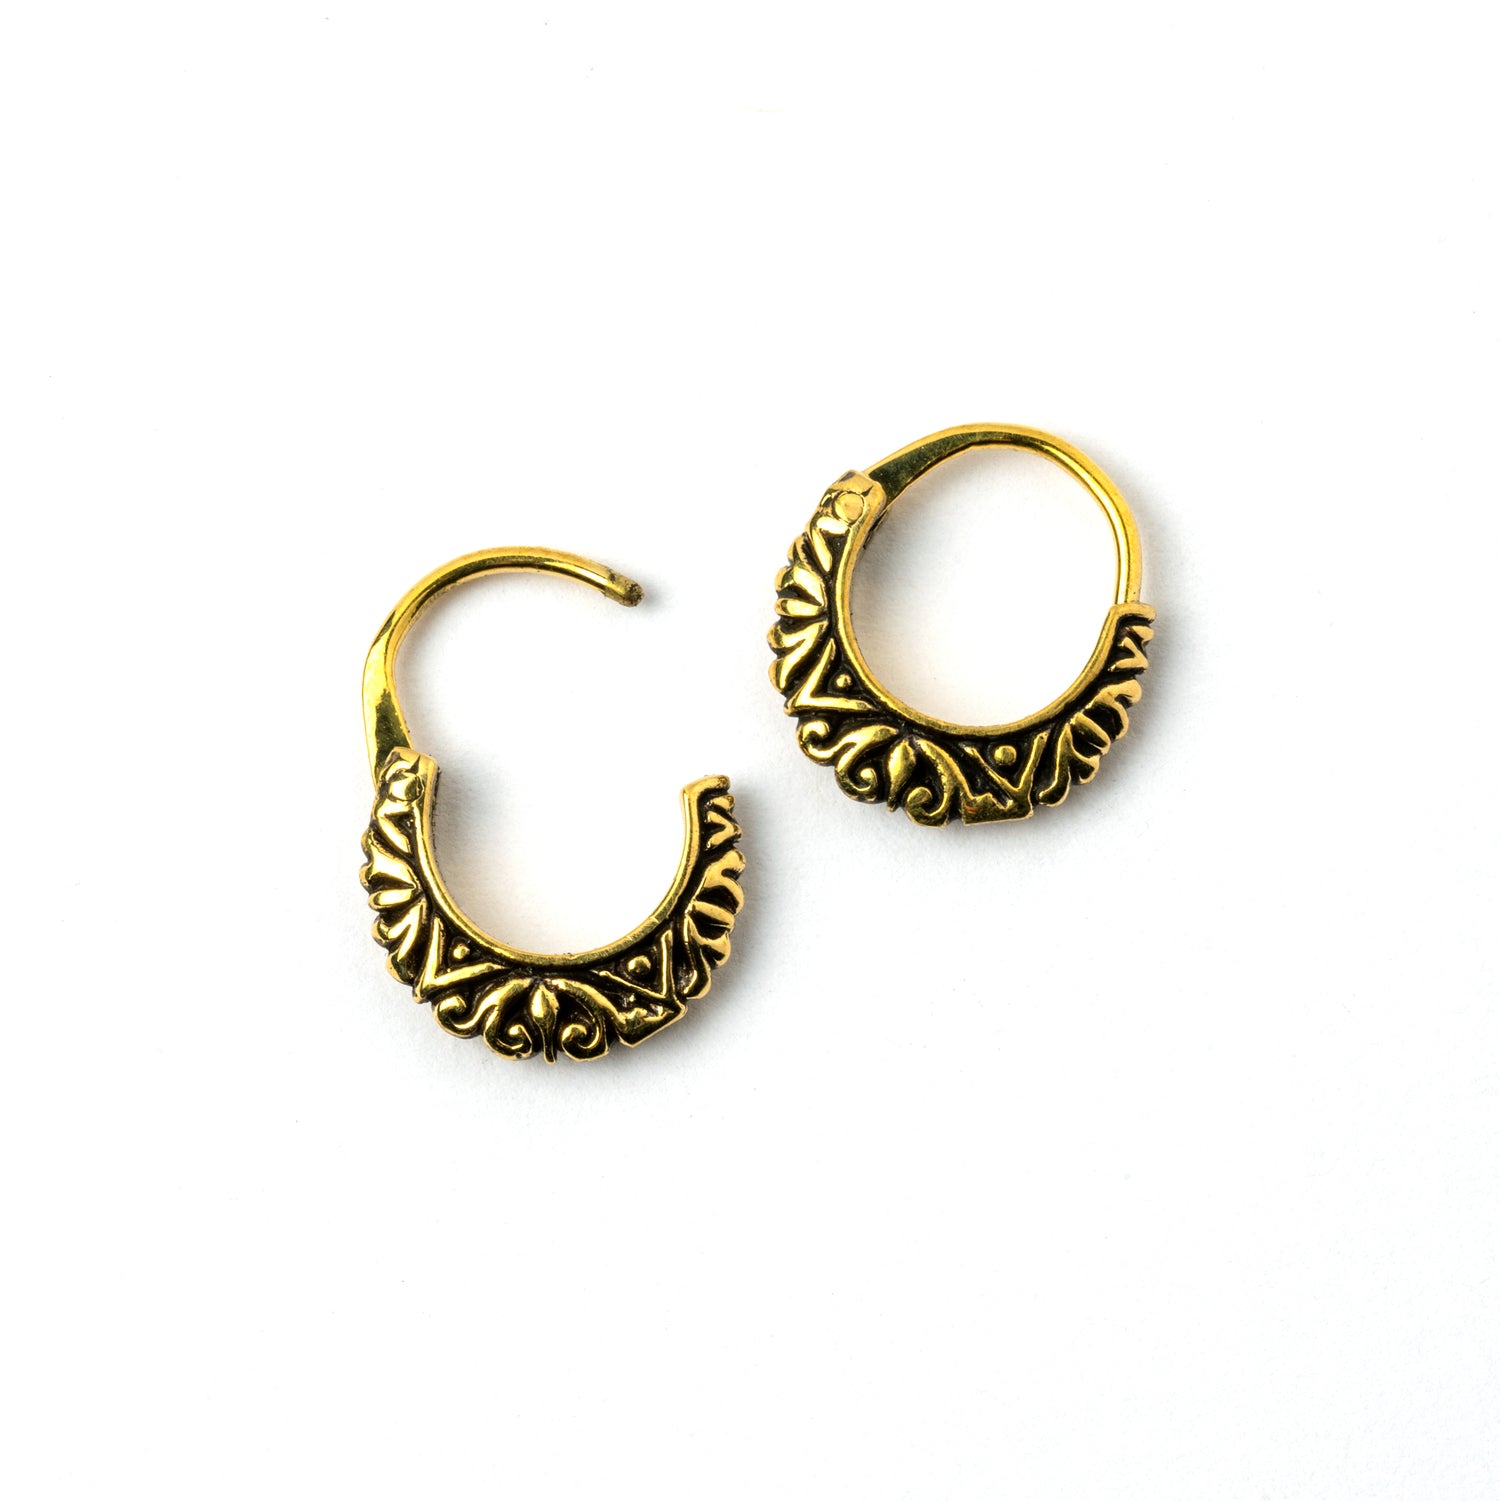 Ethnic Floral Hoop Earrings open clasp view